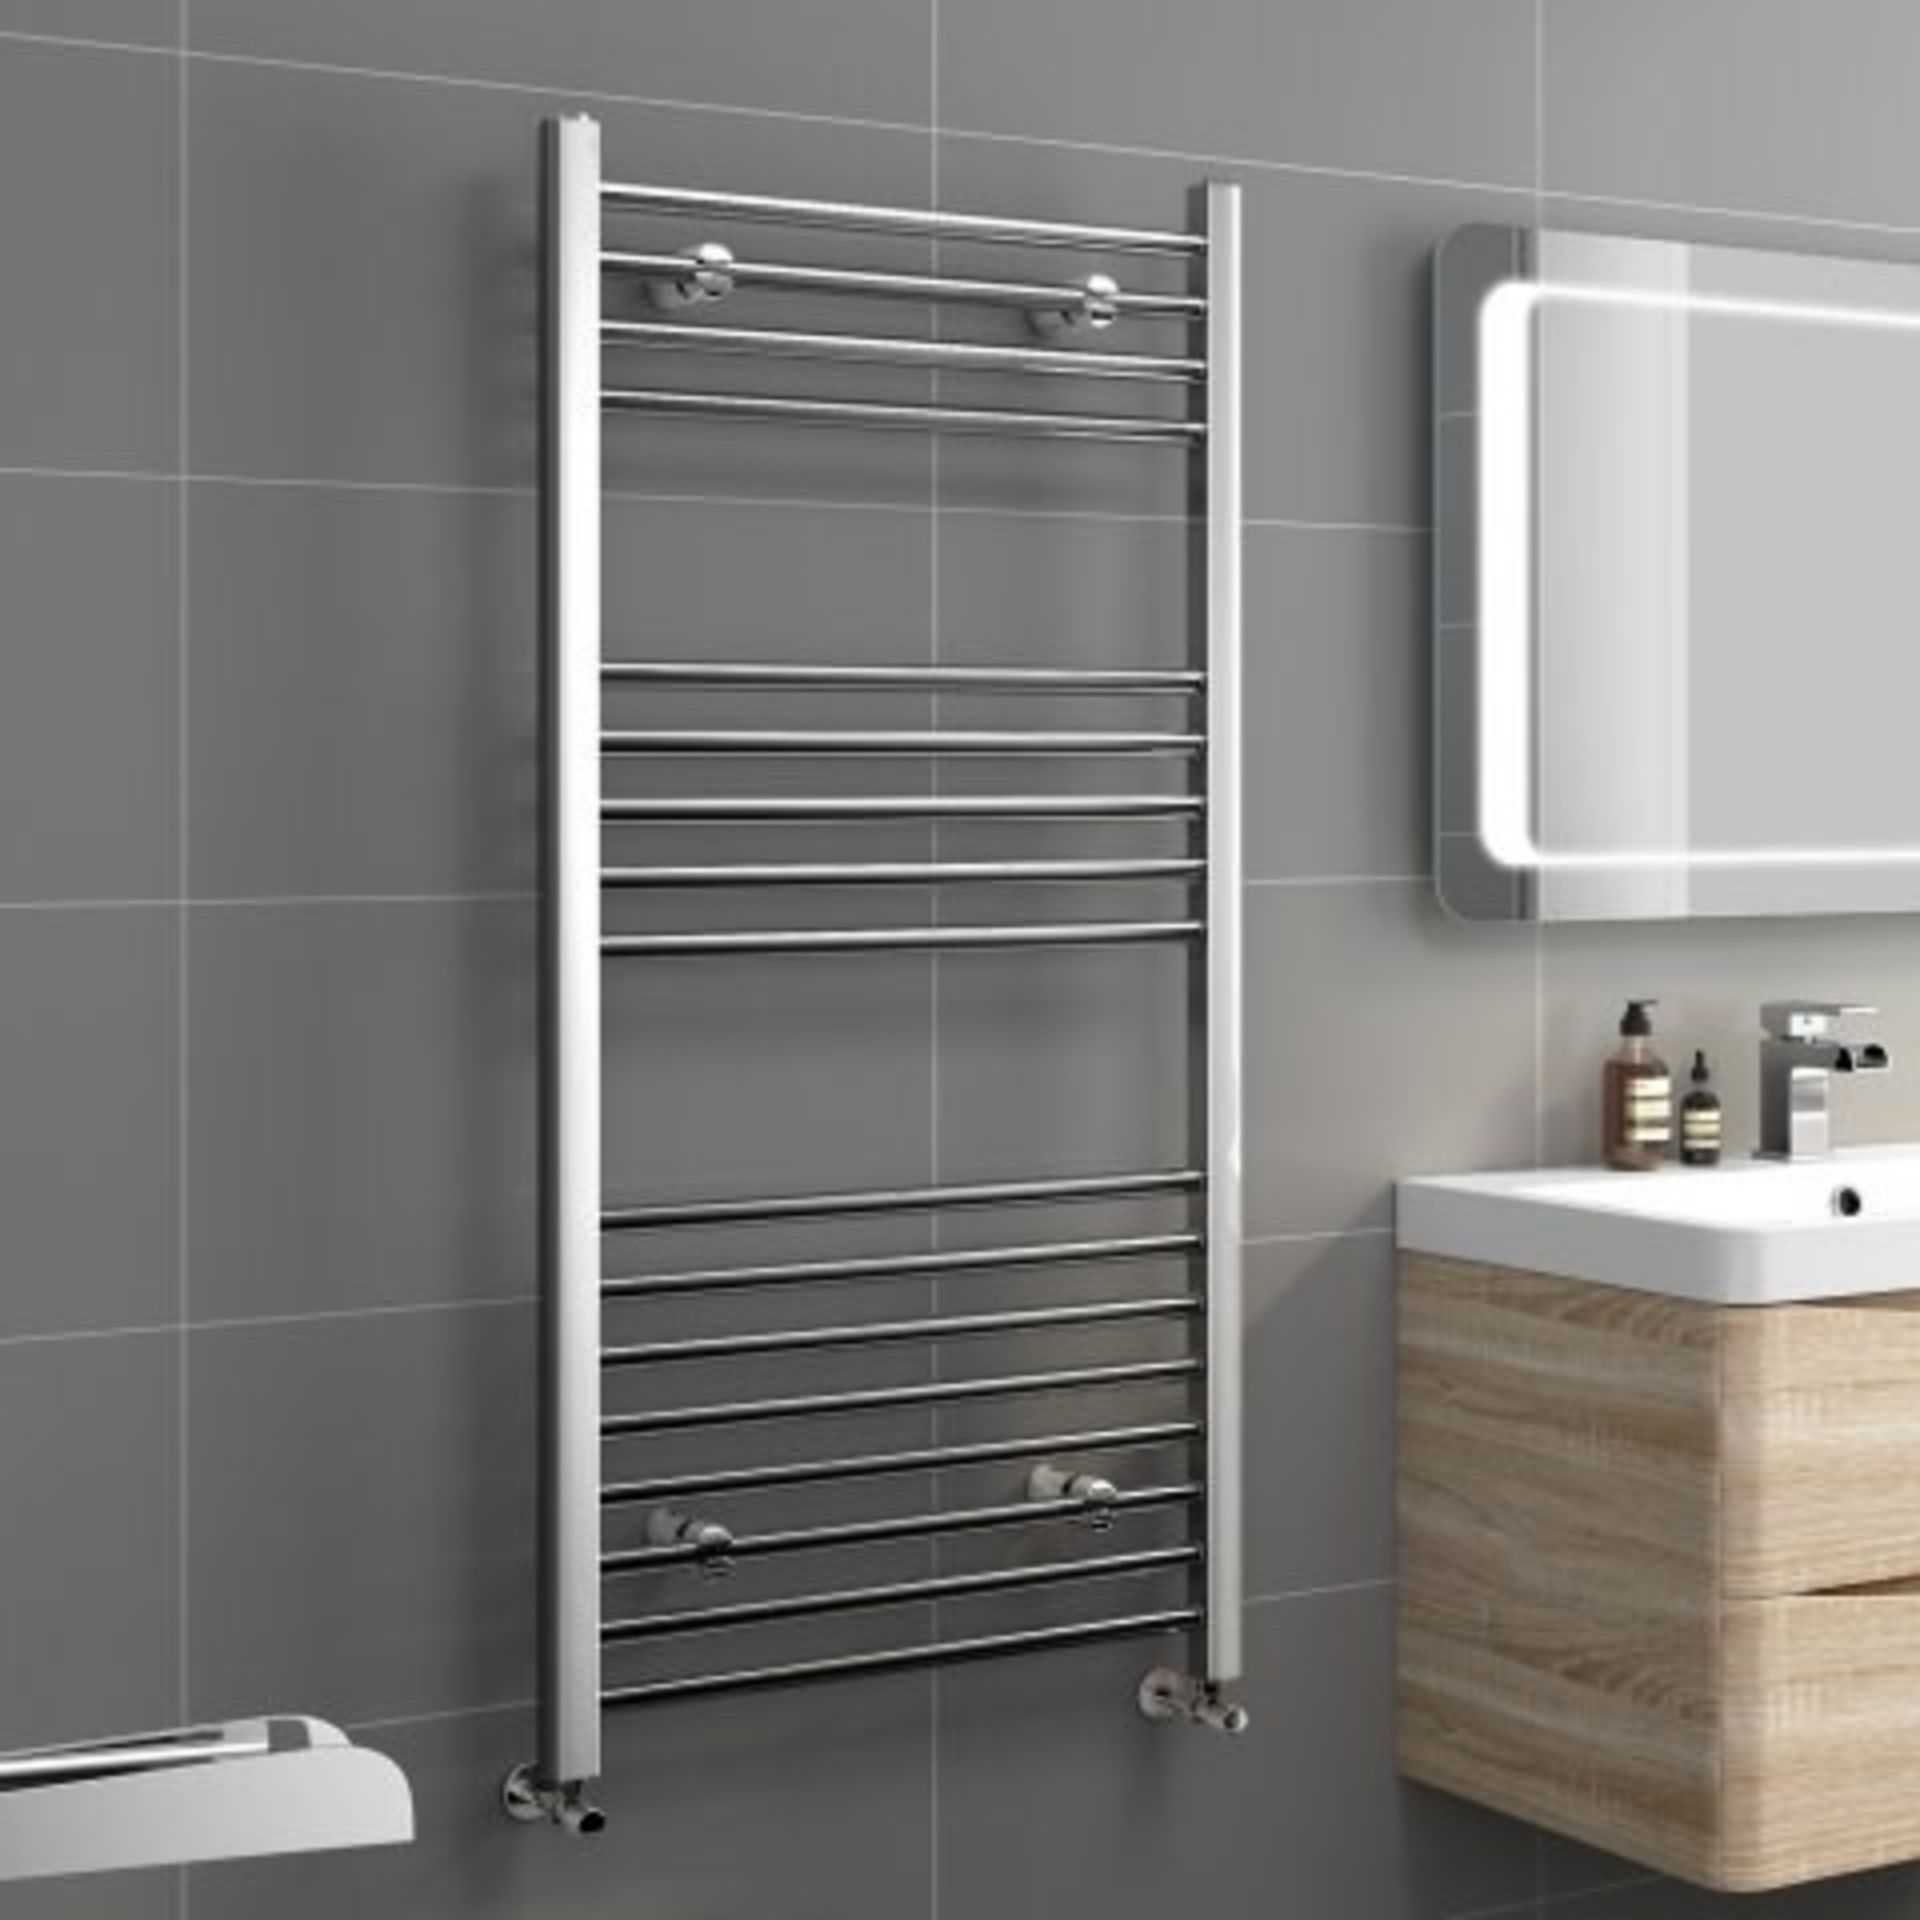 BRAND NEW BOXED 1200x600mm - 20mm Tubes - Chrome Heated Straight Rail Ladder Towel Radiator.RRP £ - Image 3 of 4